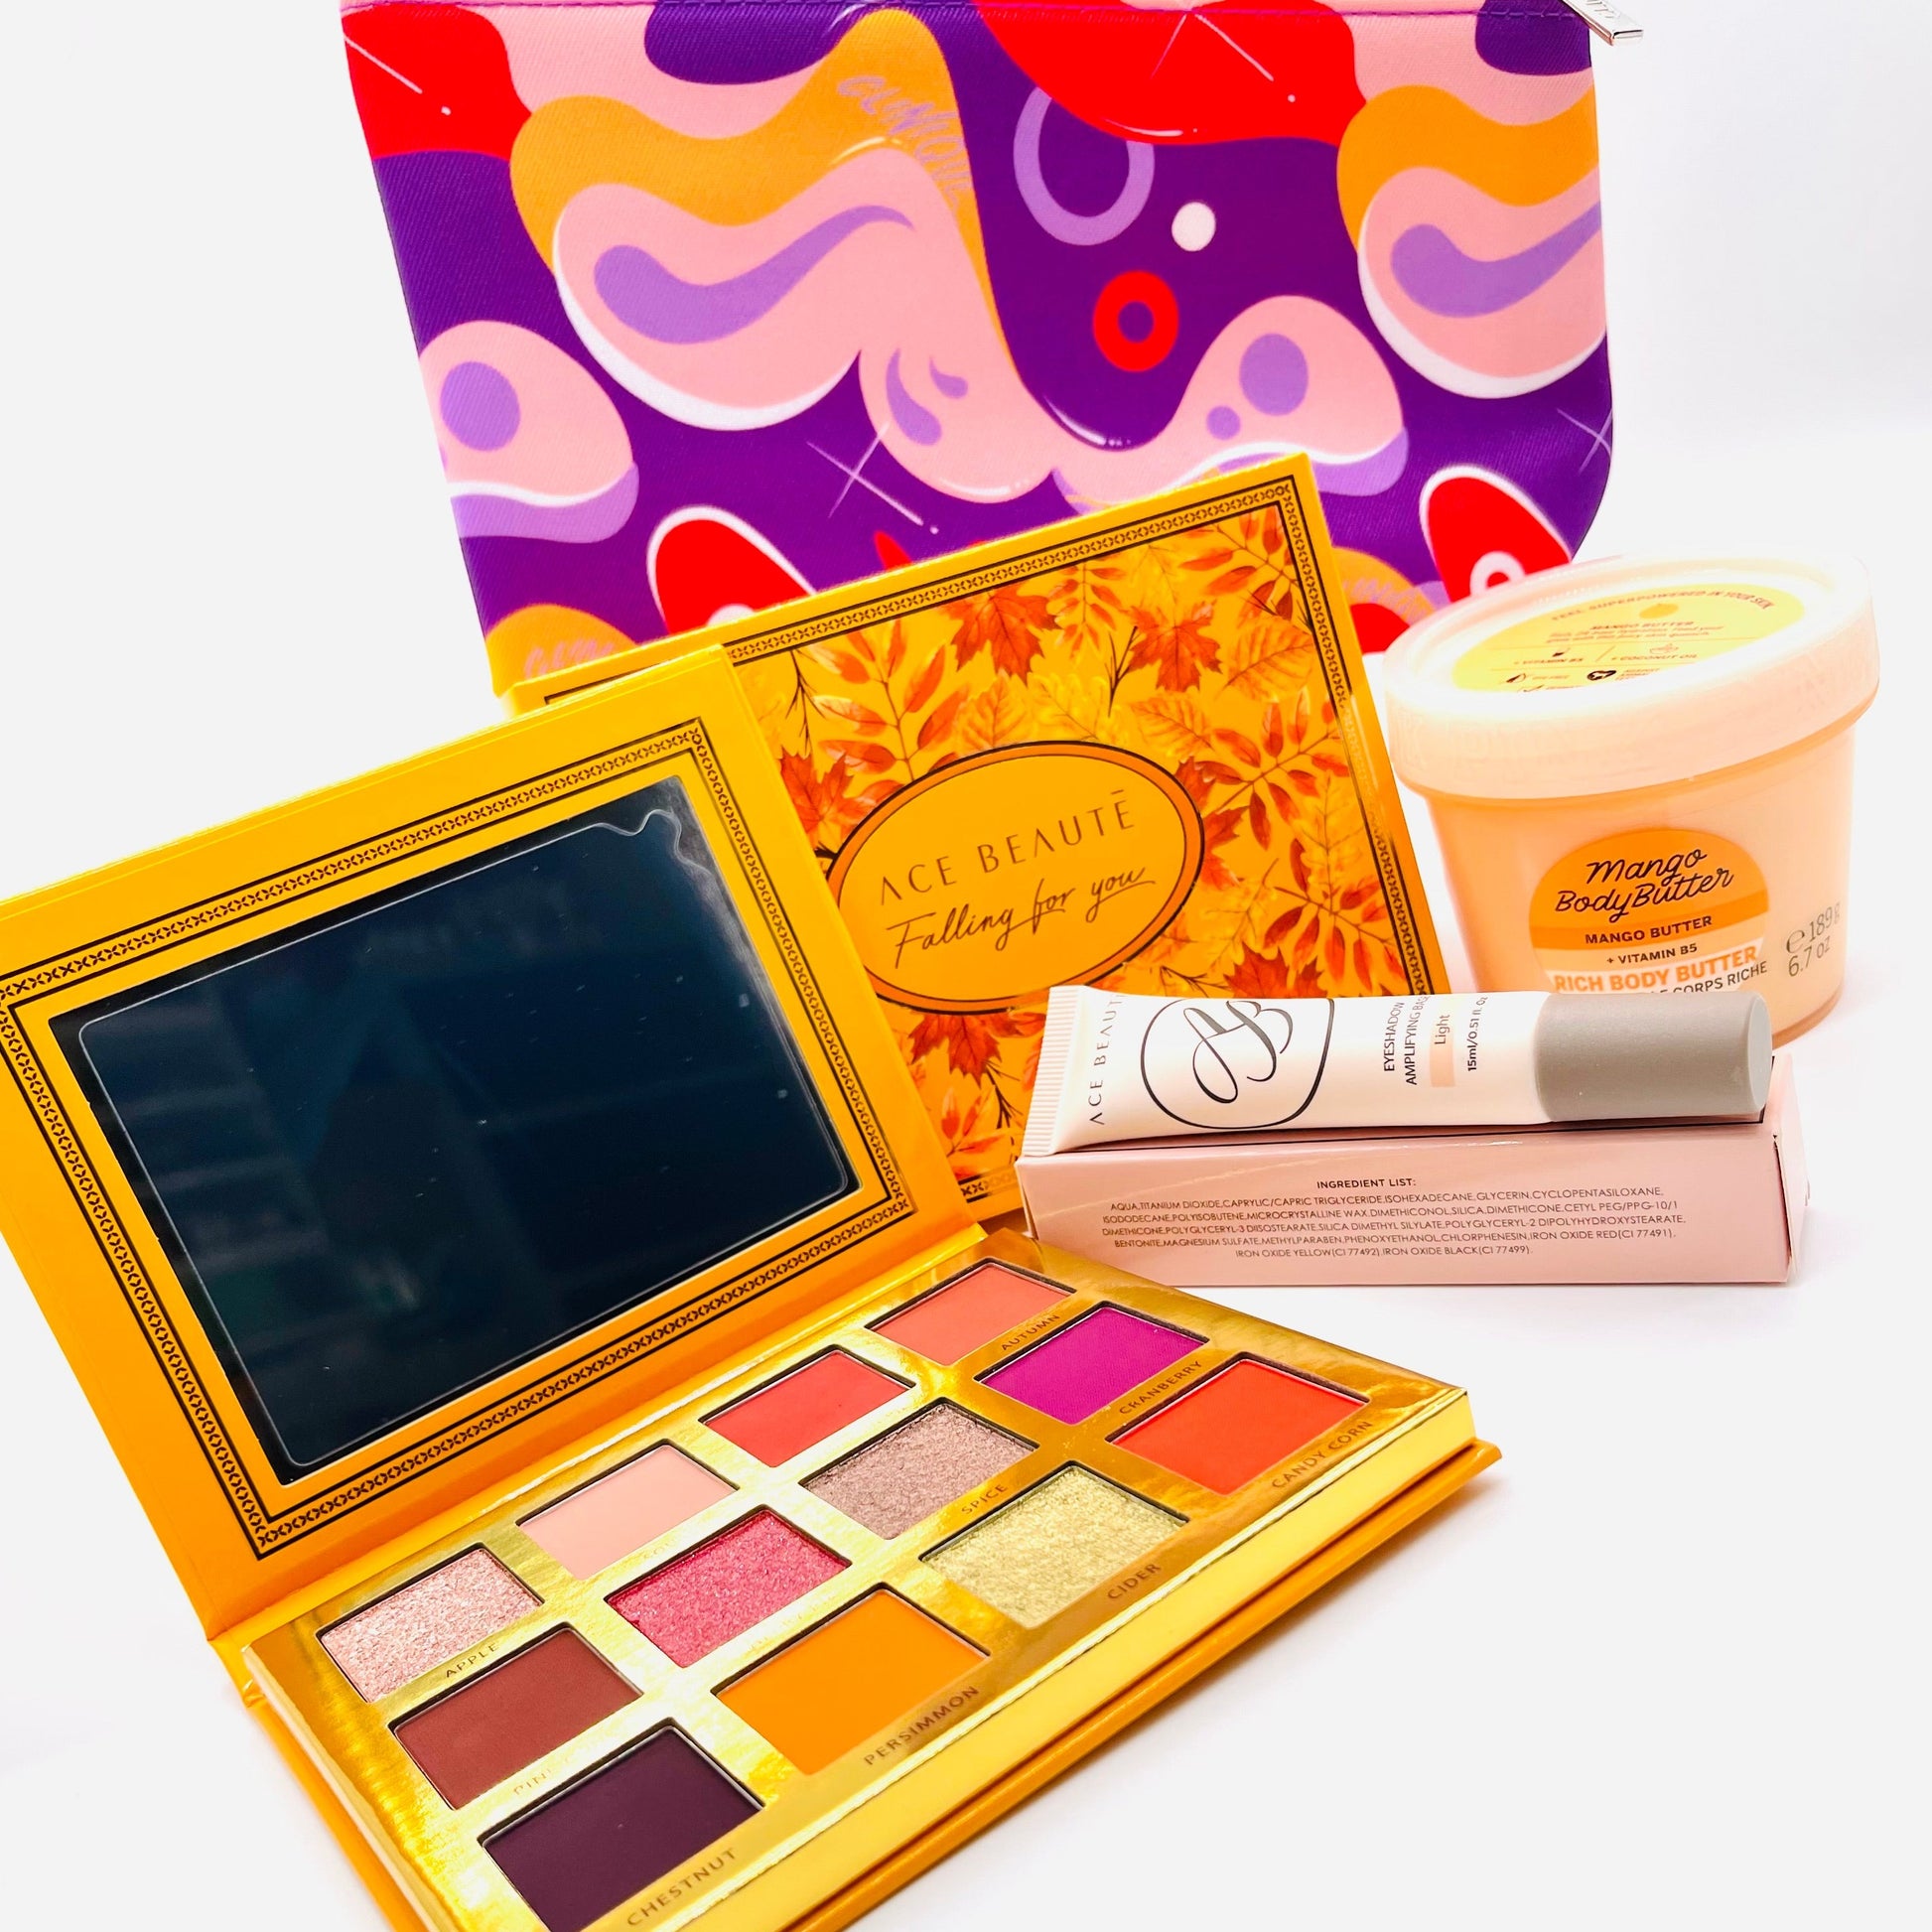 ACE IN THE WHOLE BEAUTY BUNDLE BY ACE BEAUTE